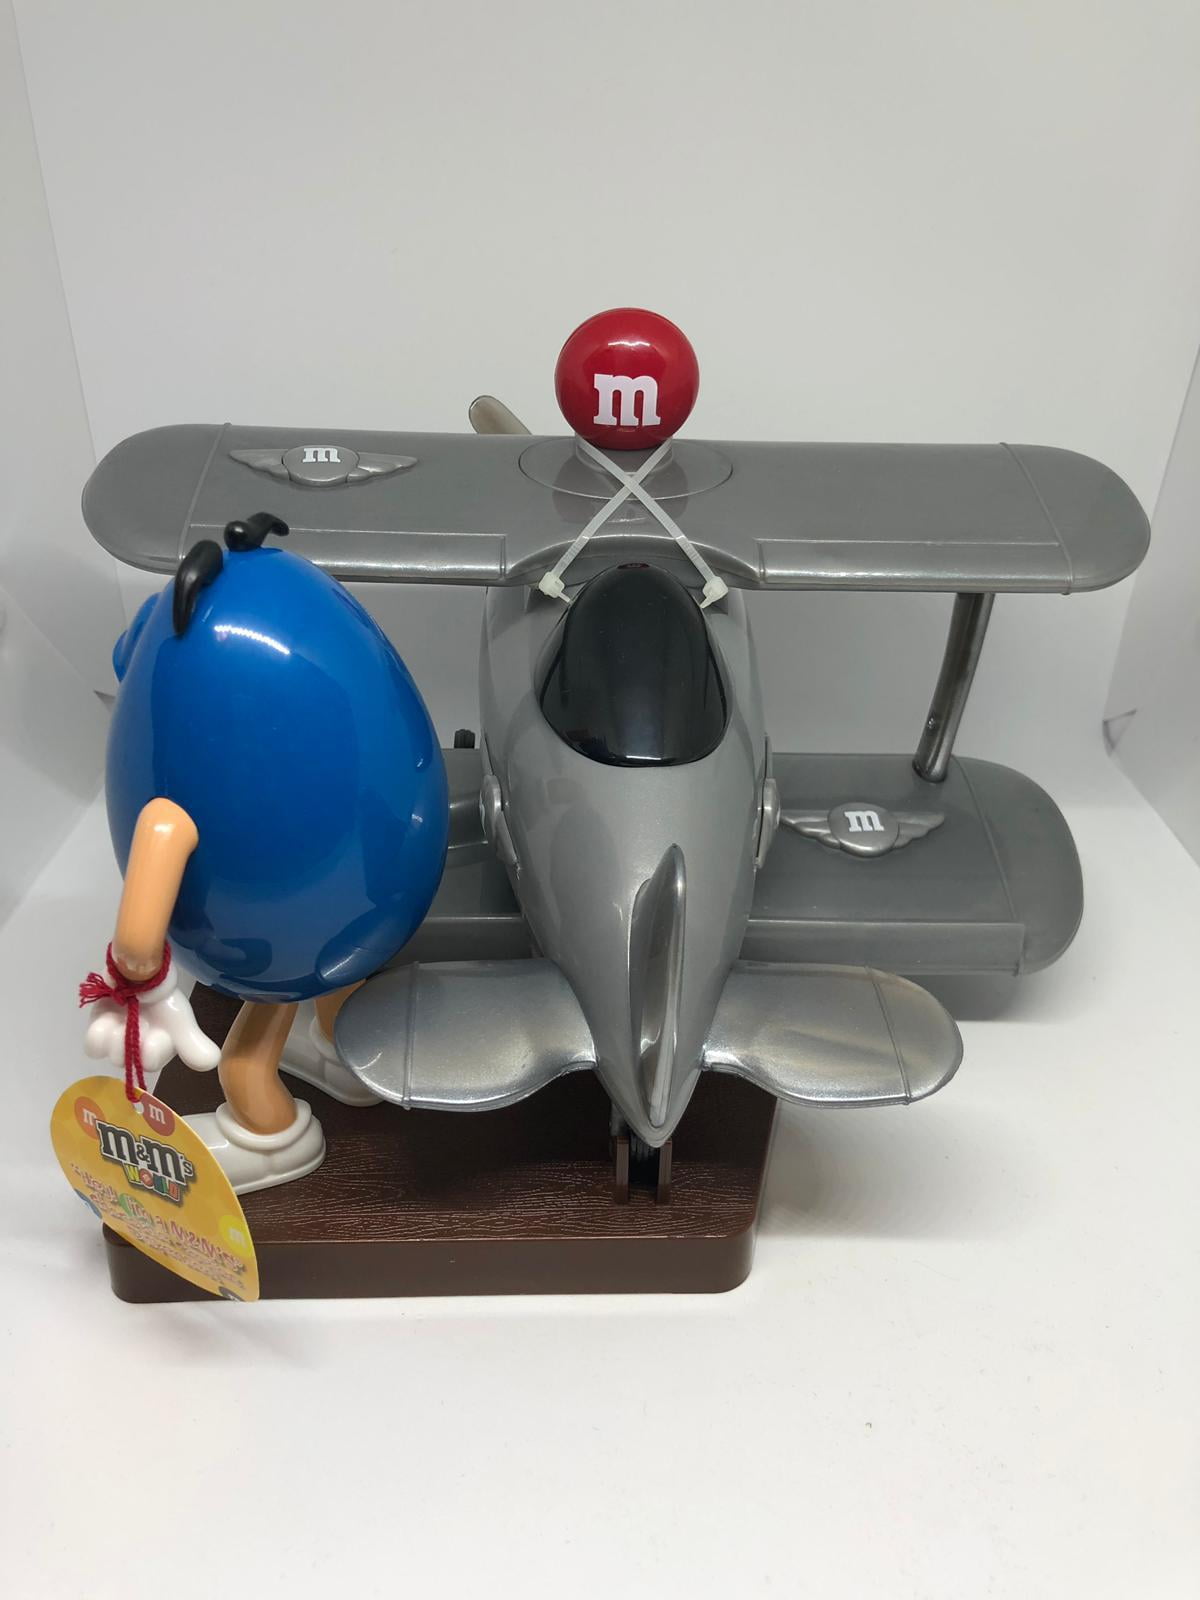 M&M's World Blue Character Recliner Candy Dispenser New with Tags – I Love  Characters